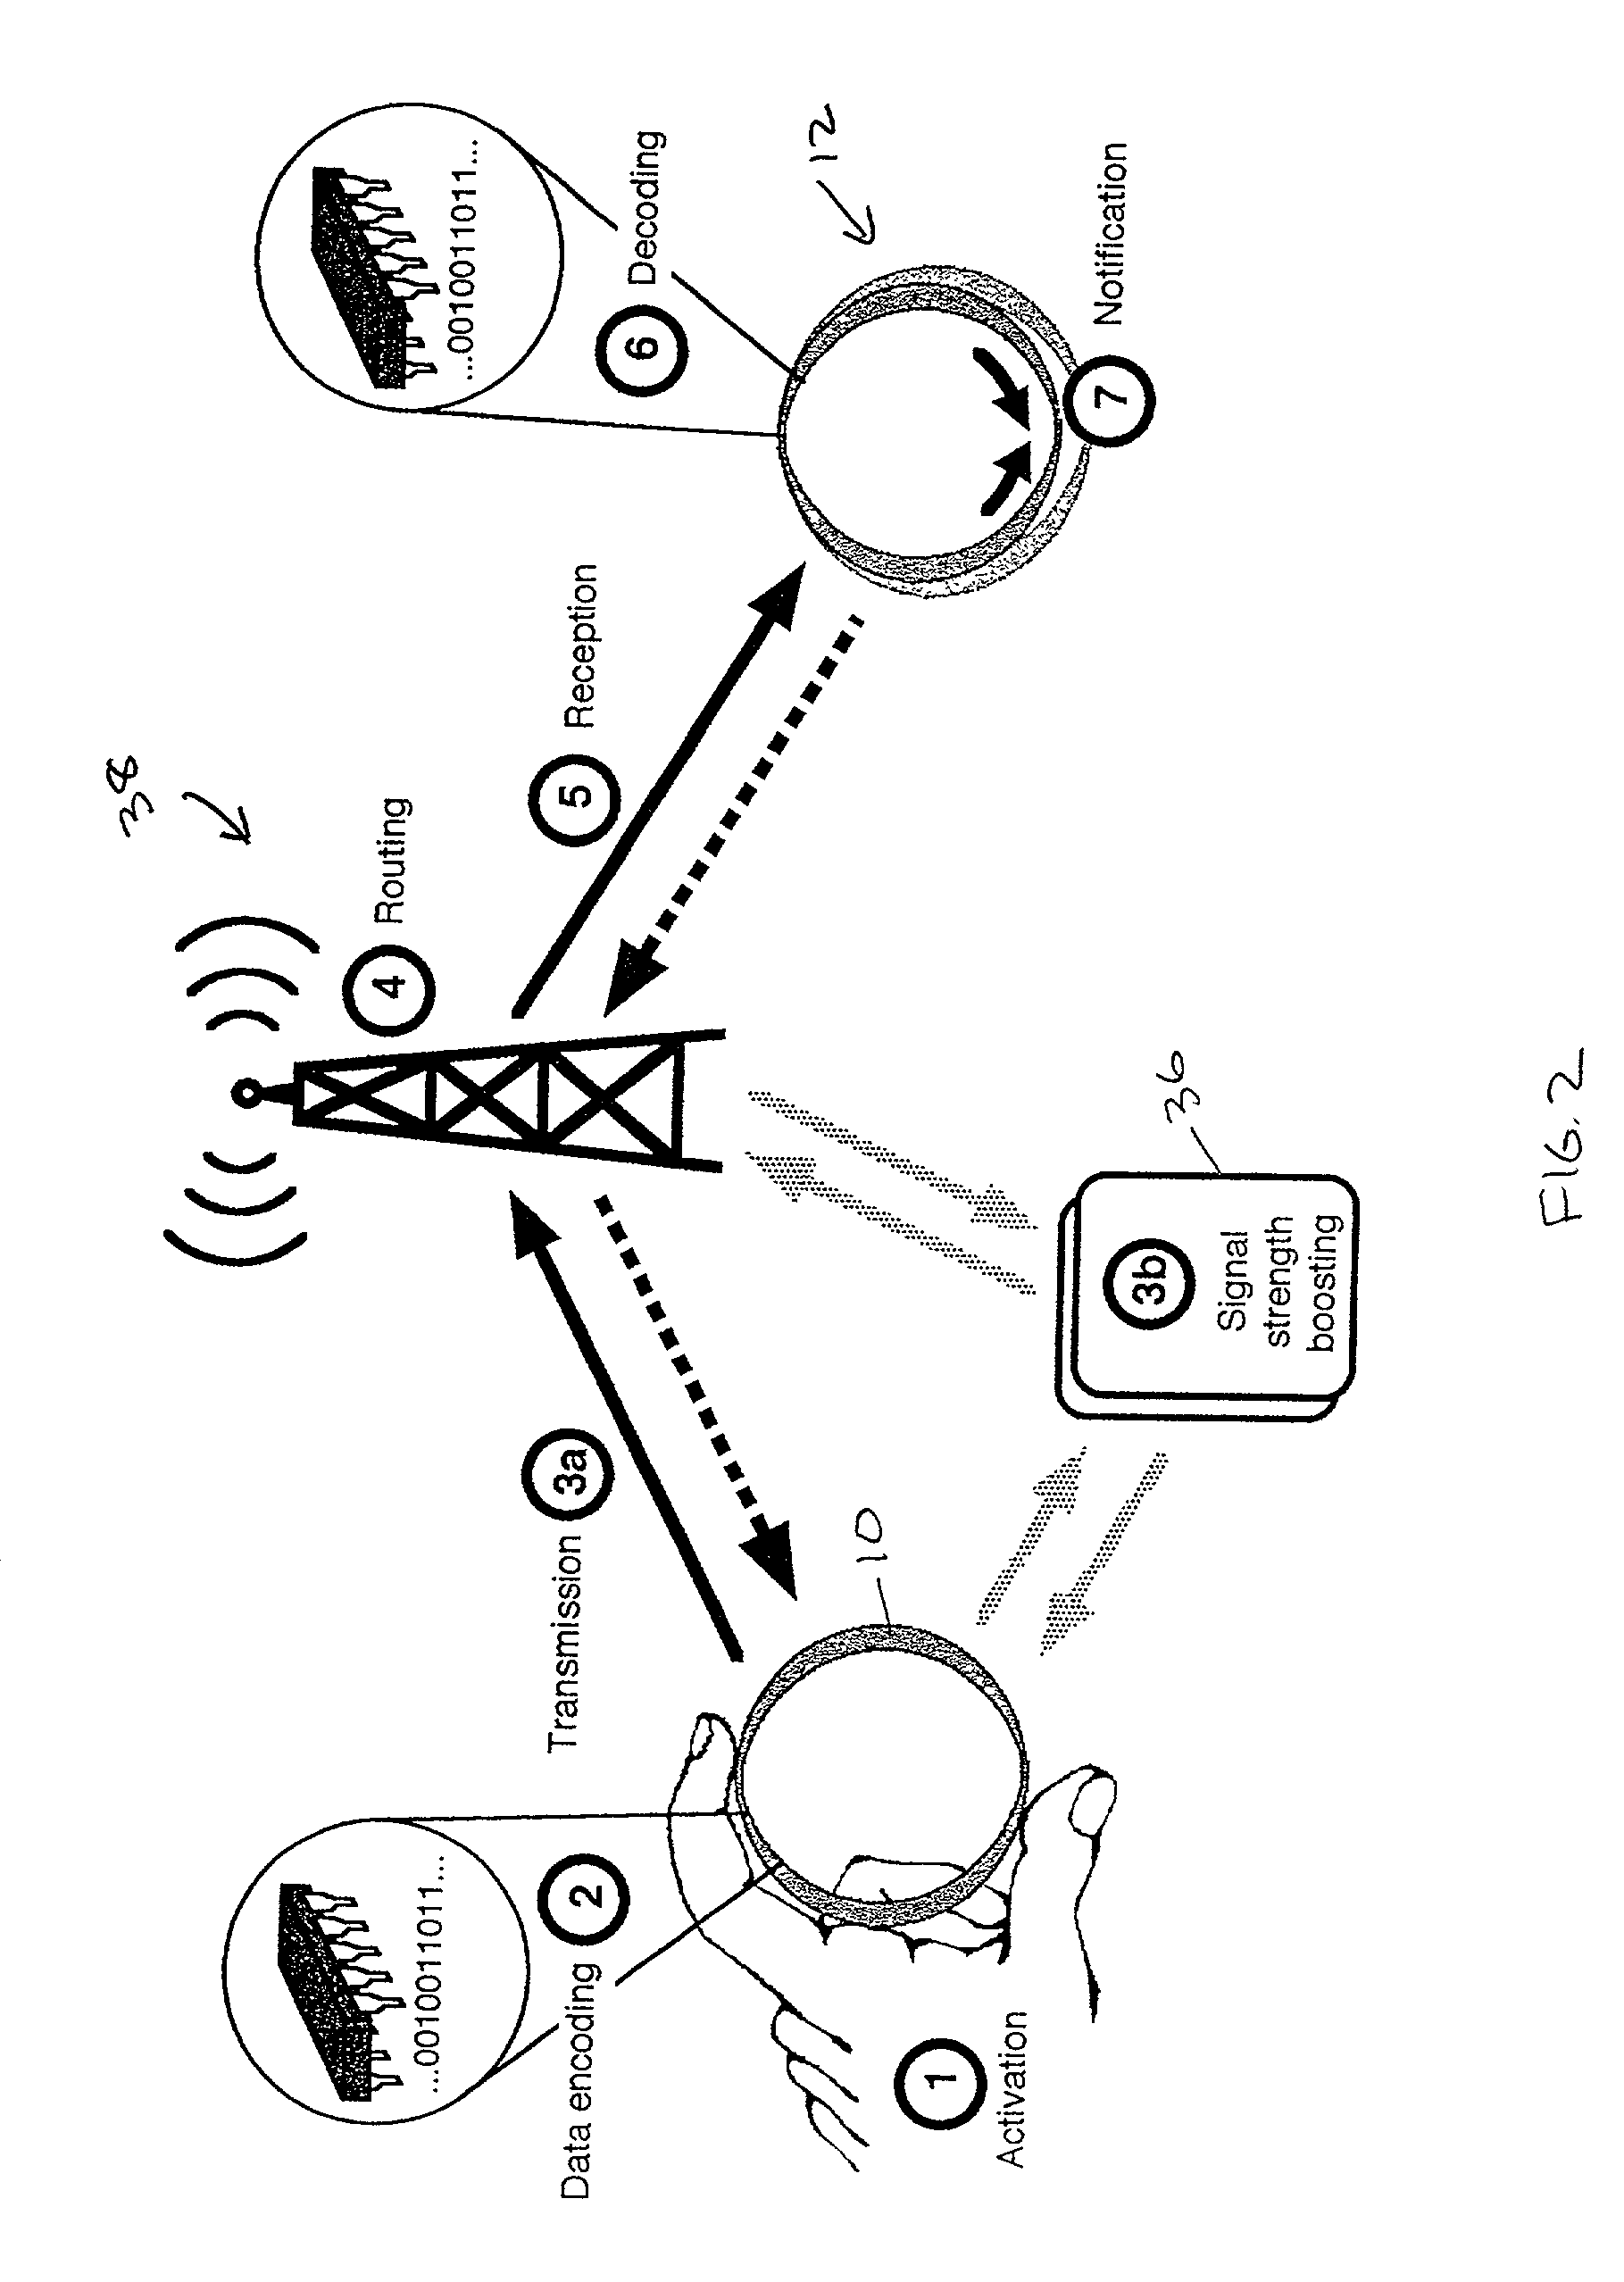 State adaptation devices and methods for wireless communications